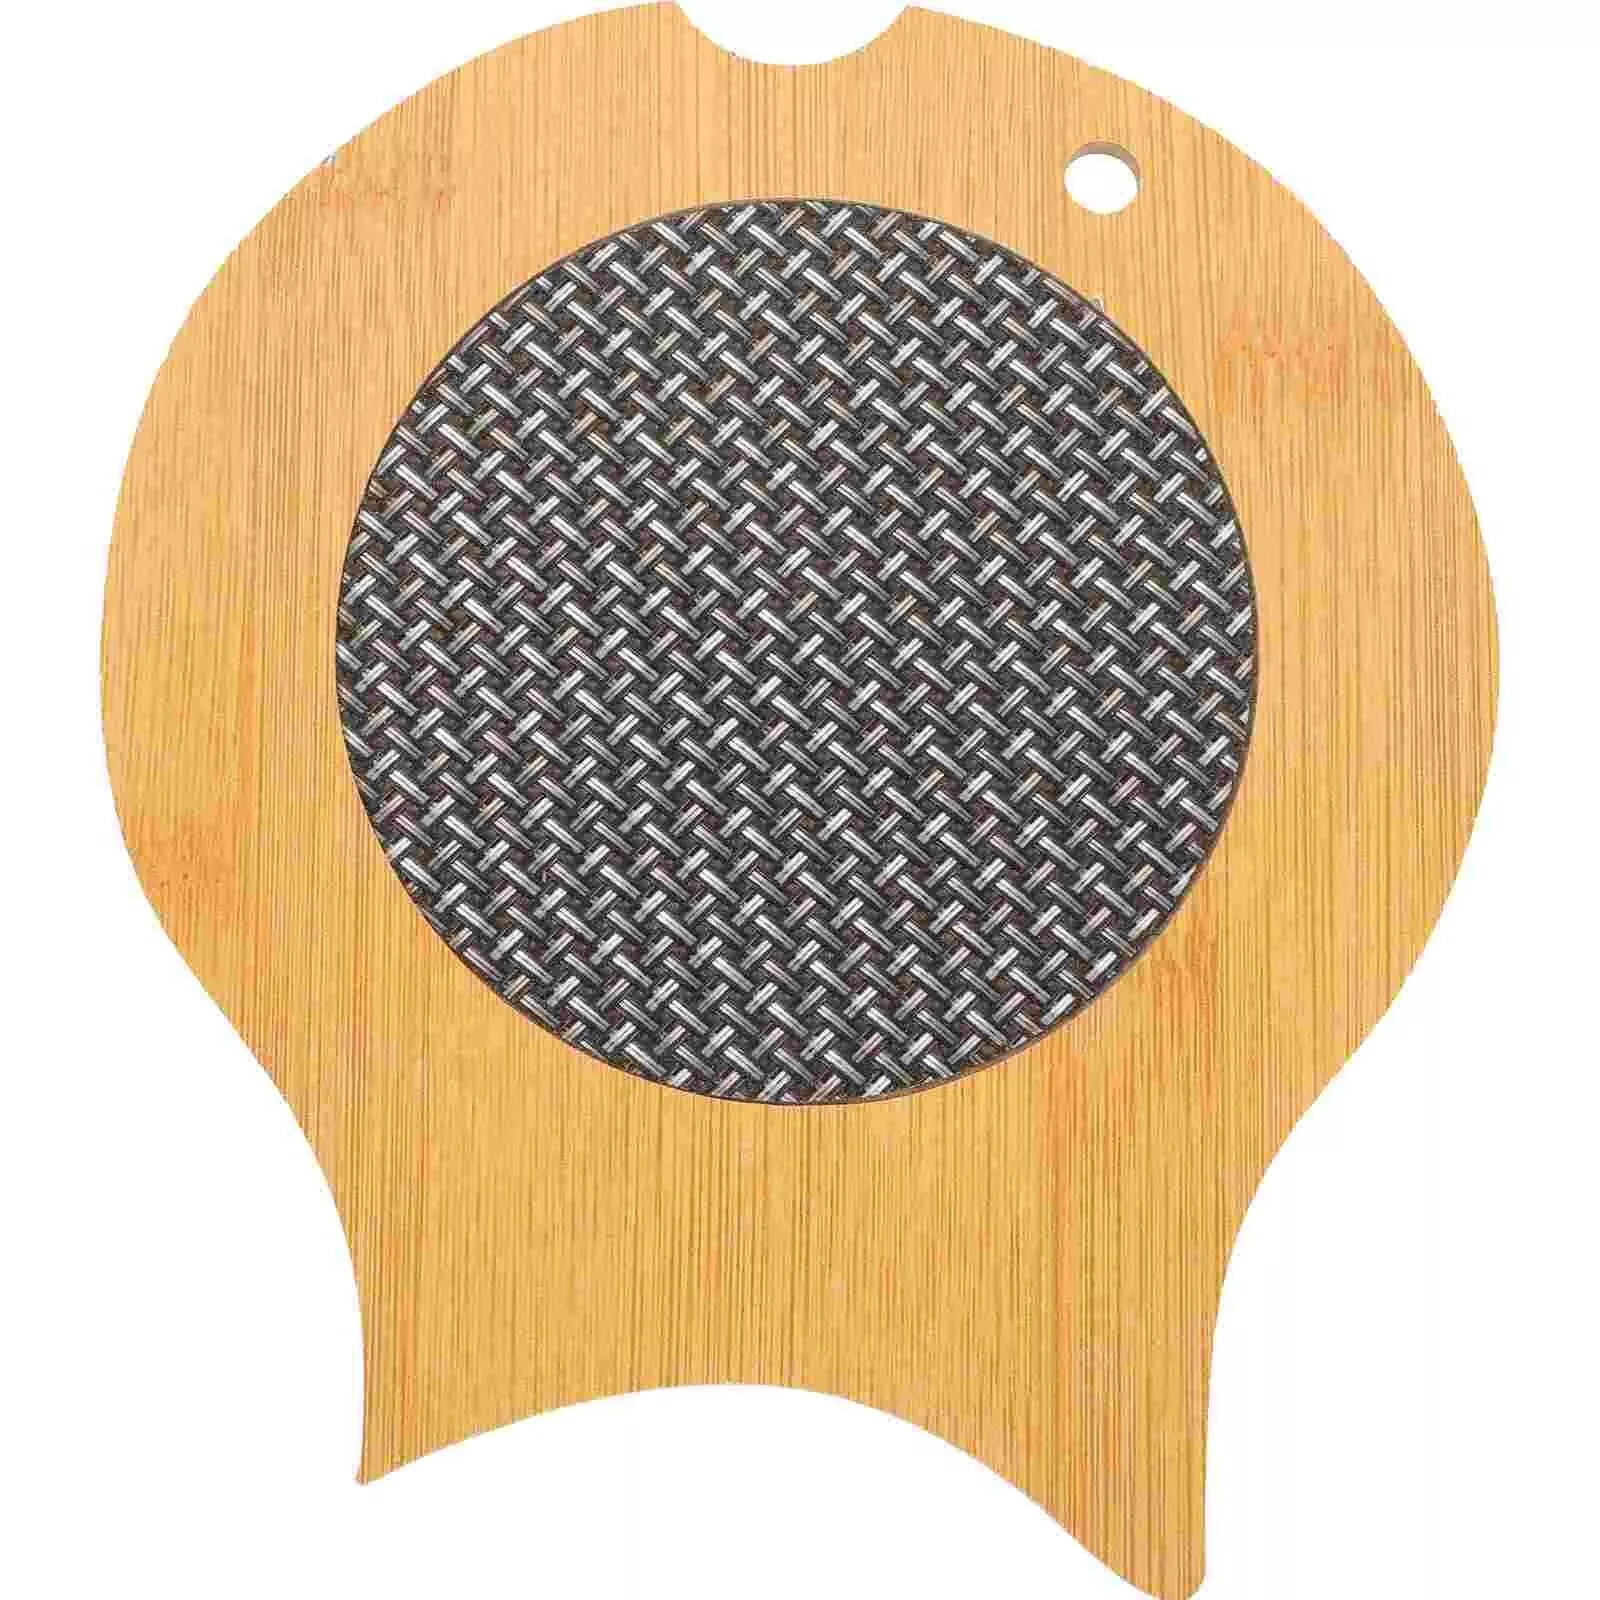 Bamboo Multi-Purpose Trivets for Kitchen and Dining – Round Classic Style Coasters and Hot Pot Holders